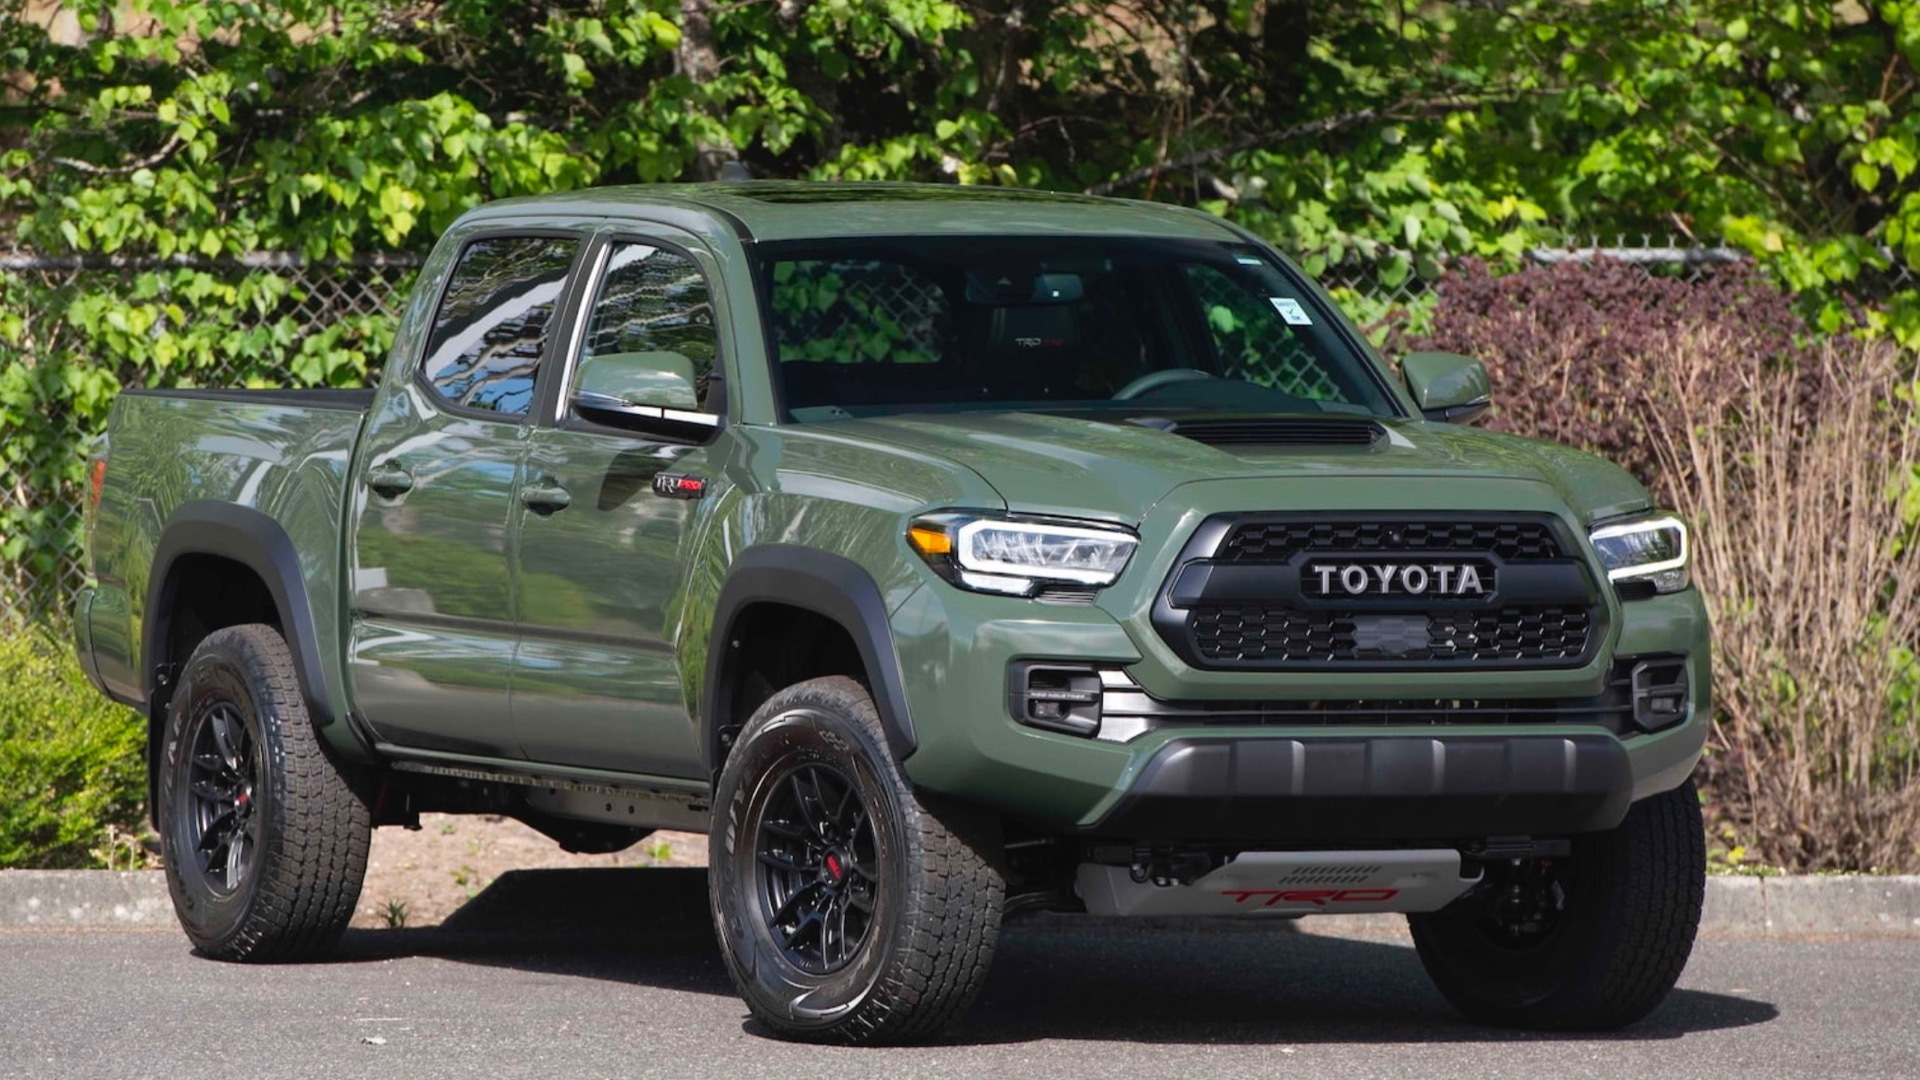 2020 Toyota Tacoma TRD Pro - One millionth Tacoma built (Photo by Mecum Auctions)